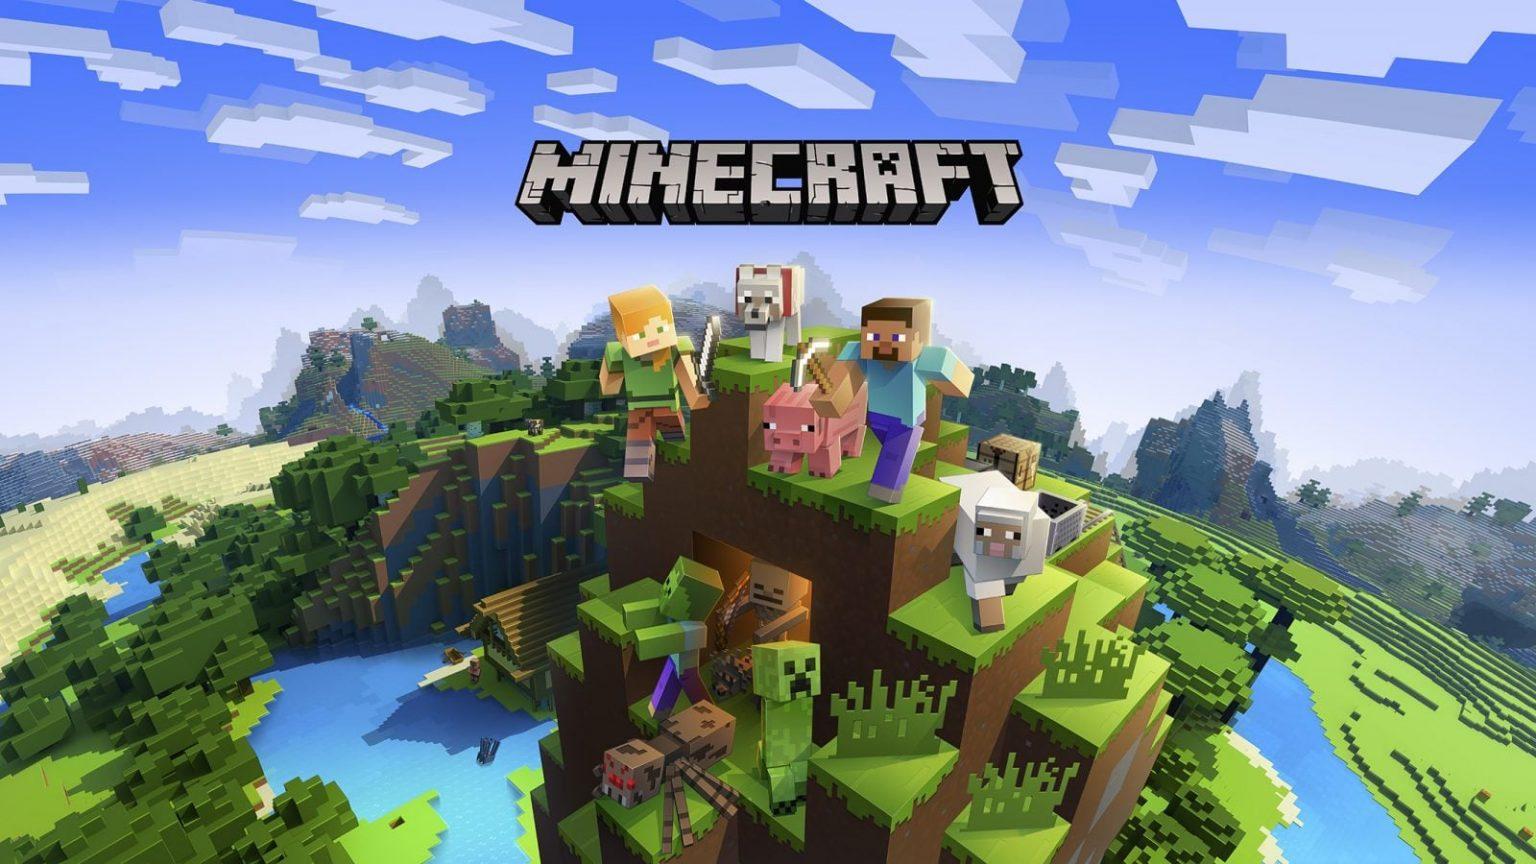 is there any free minecraft download in the computer